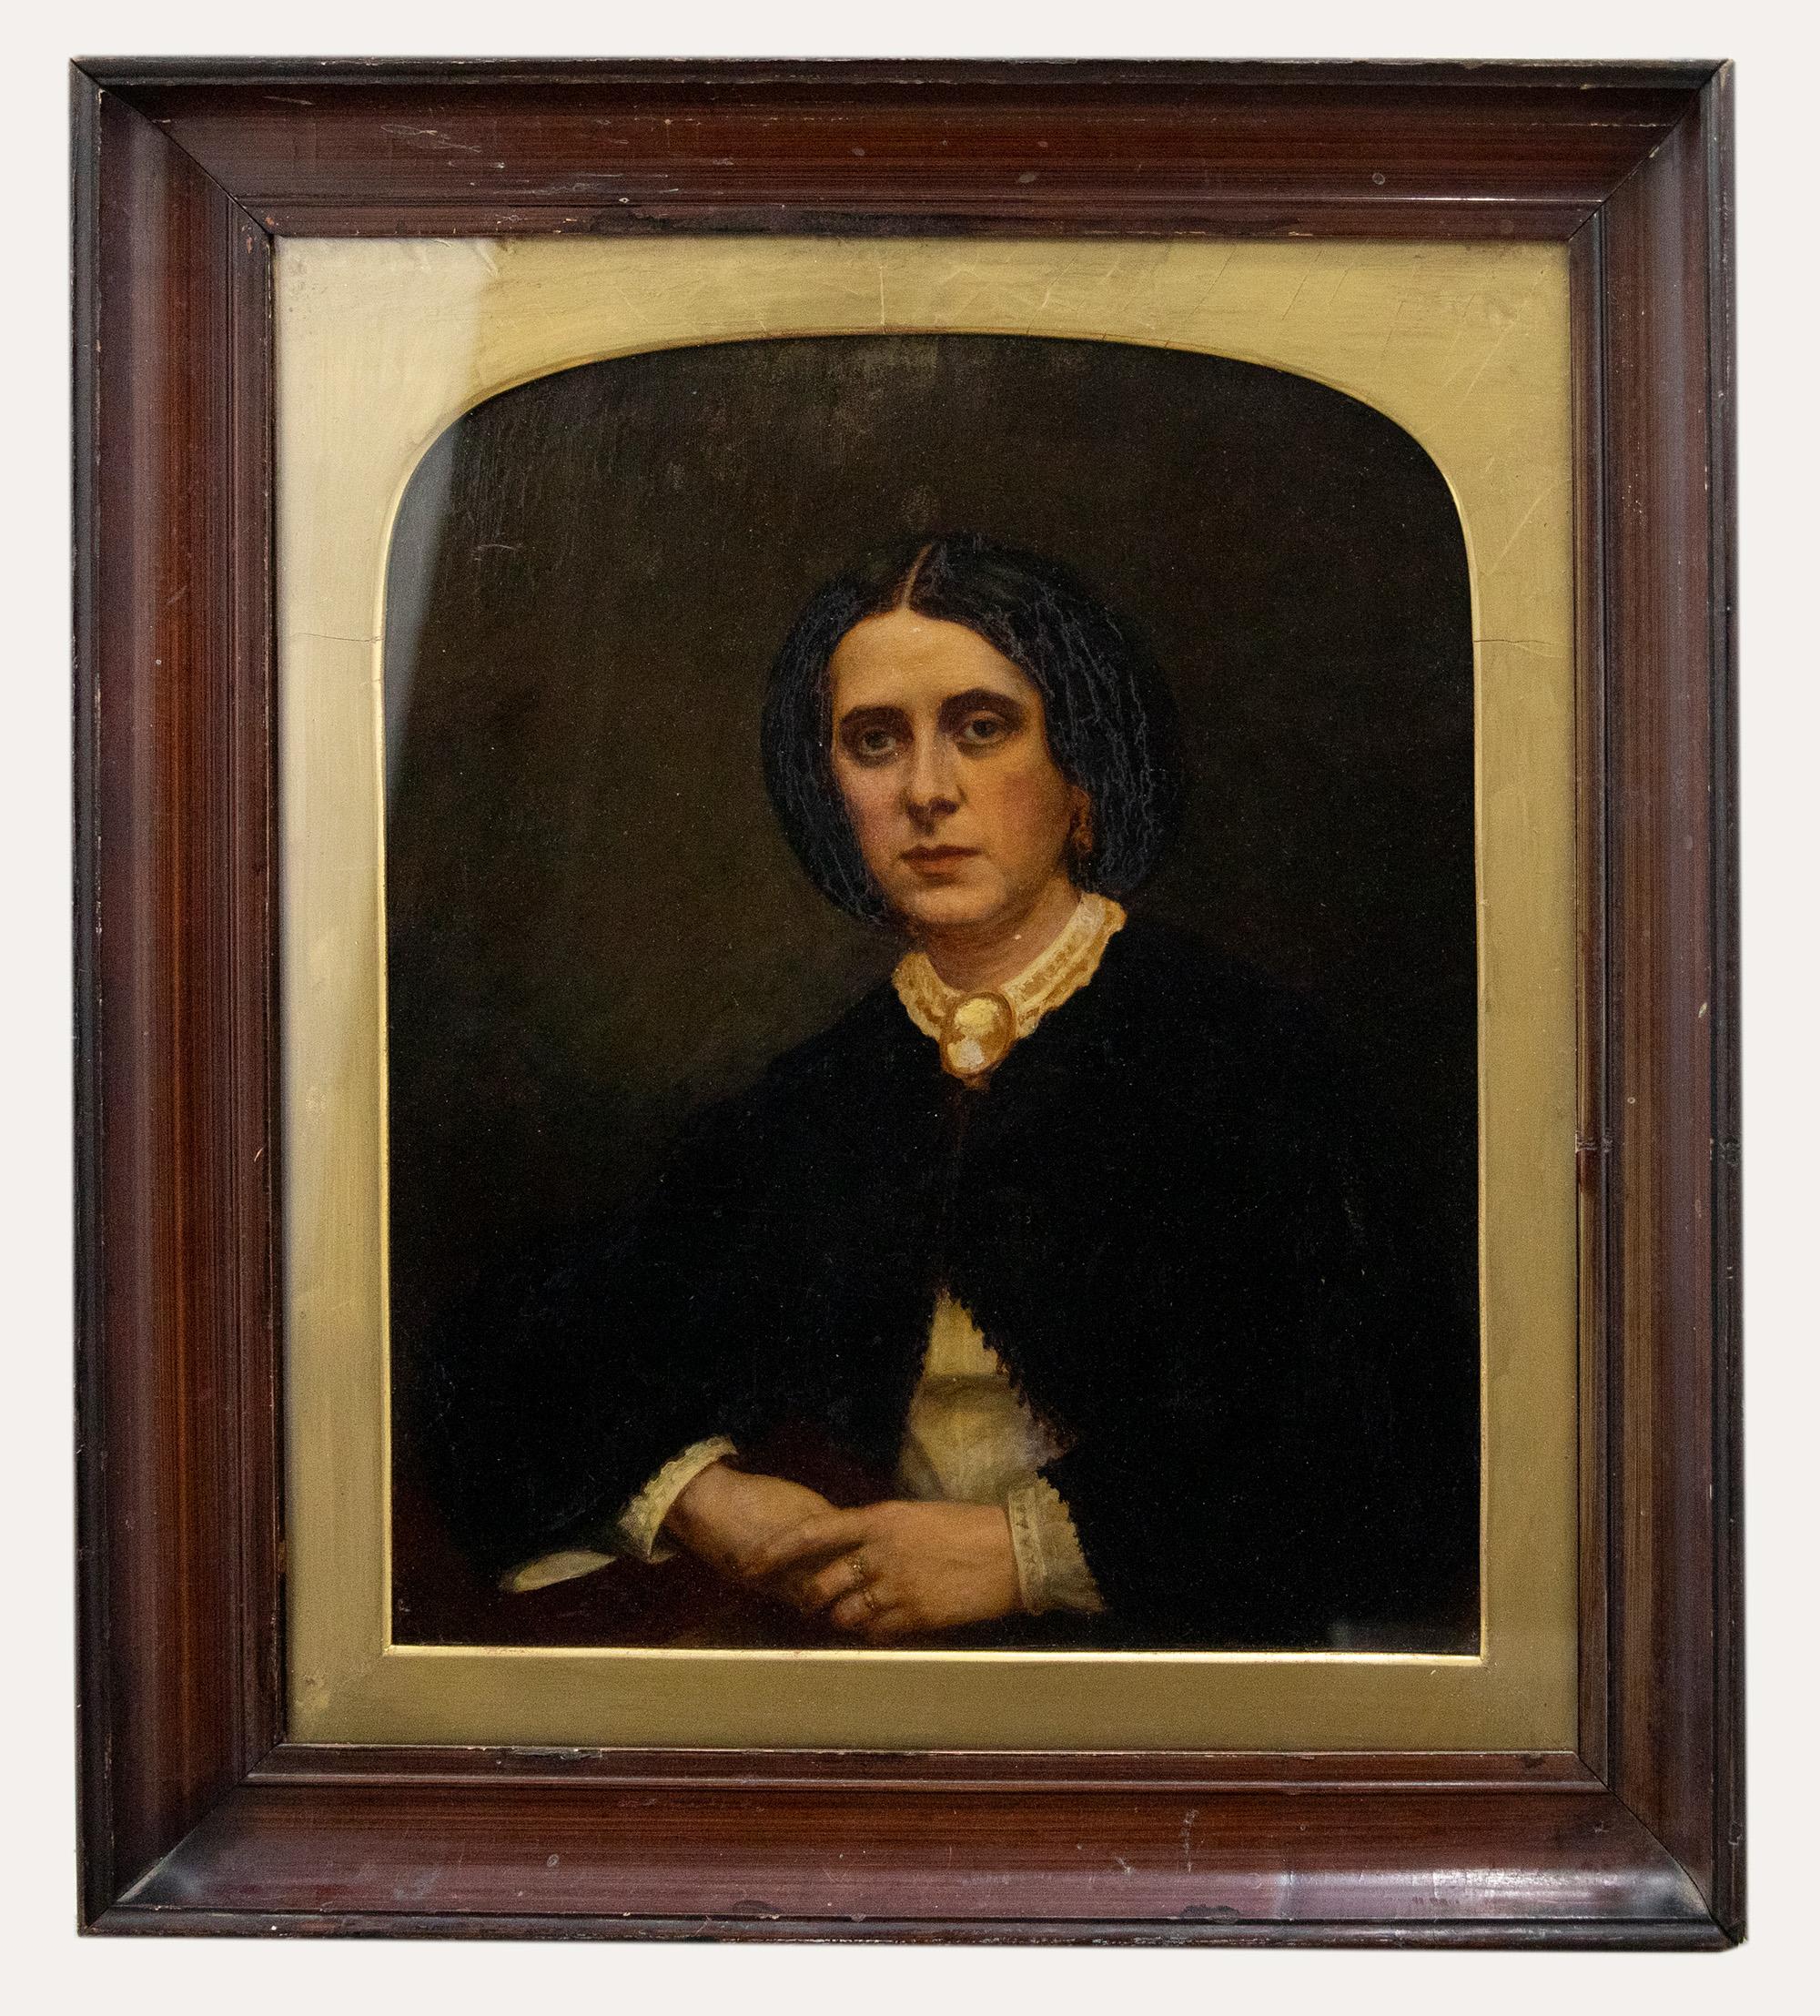 Unknown Portrait Painting - 19th Century Oil - Victorian Lady in Mourning